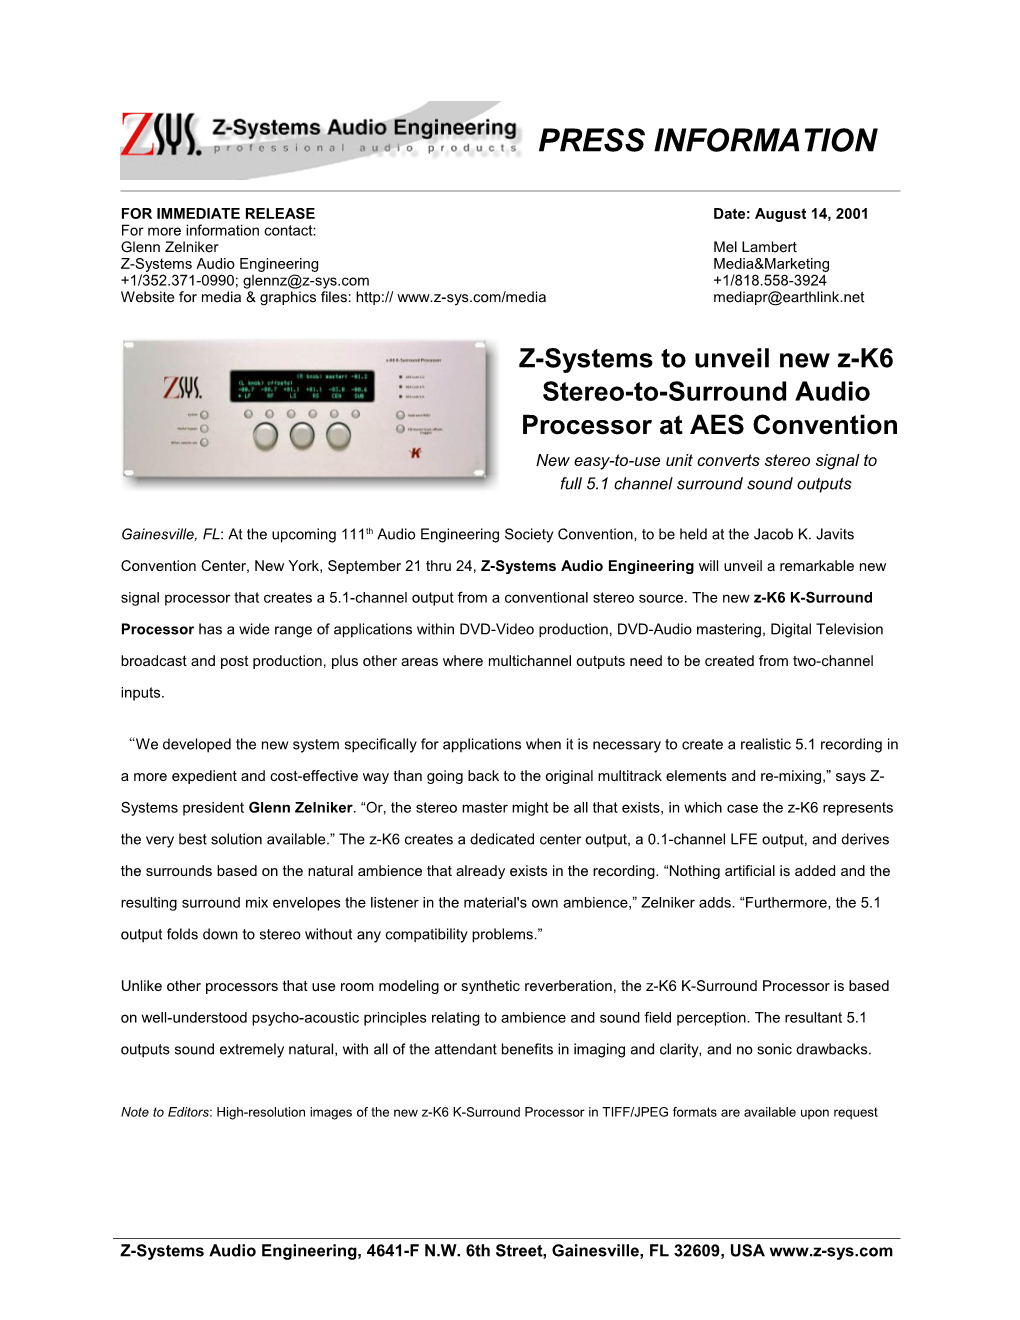 Z-Systems Names Media&Marketing As PR Counsel Page 2